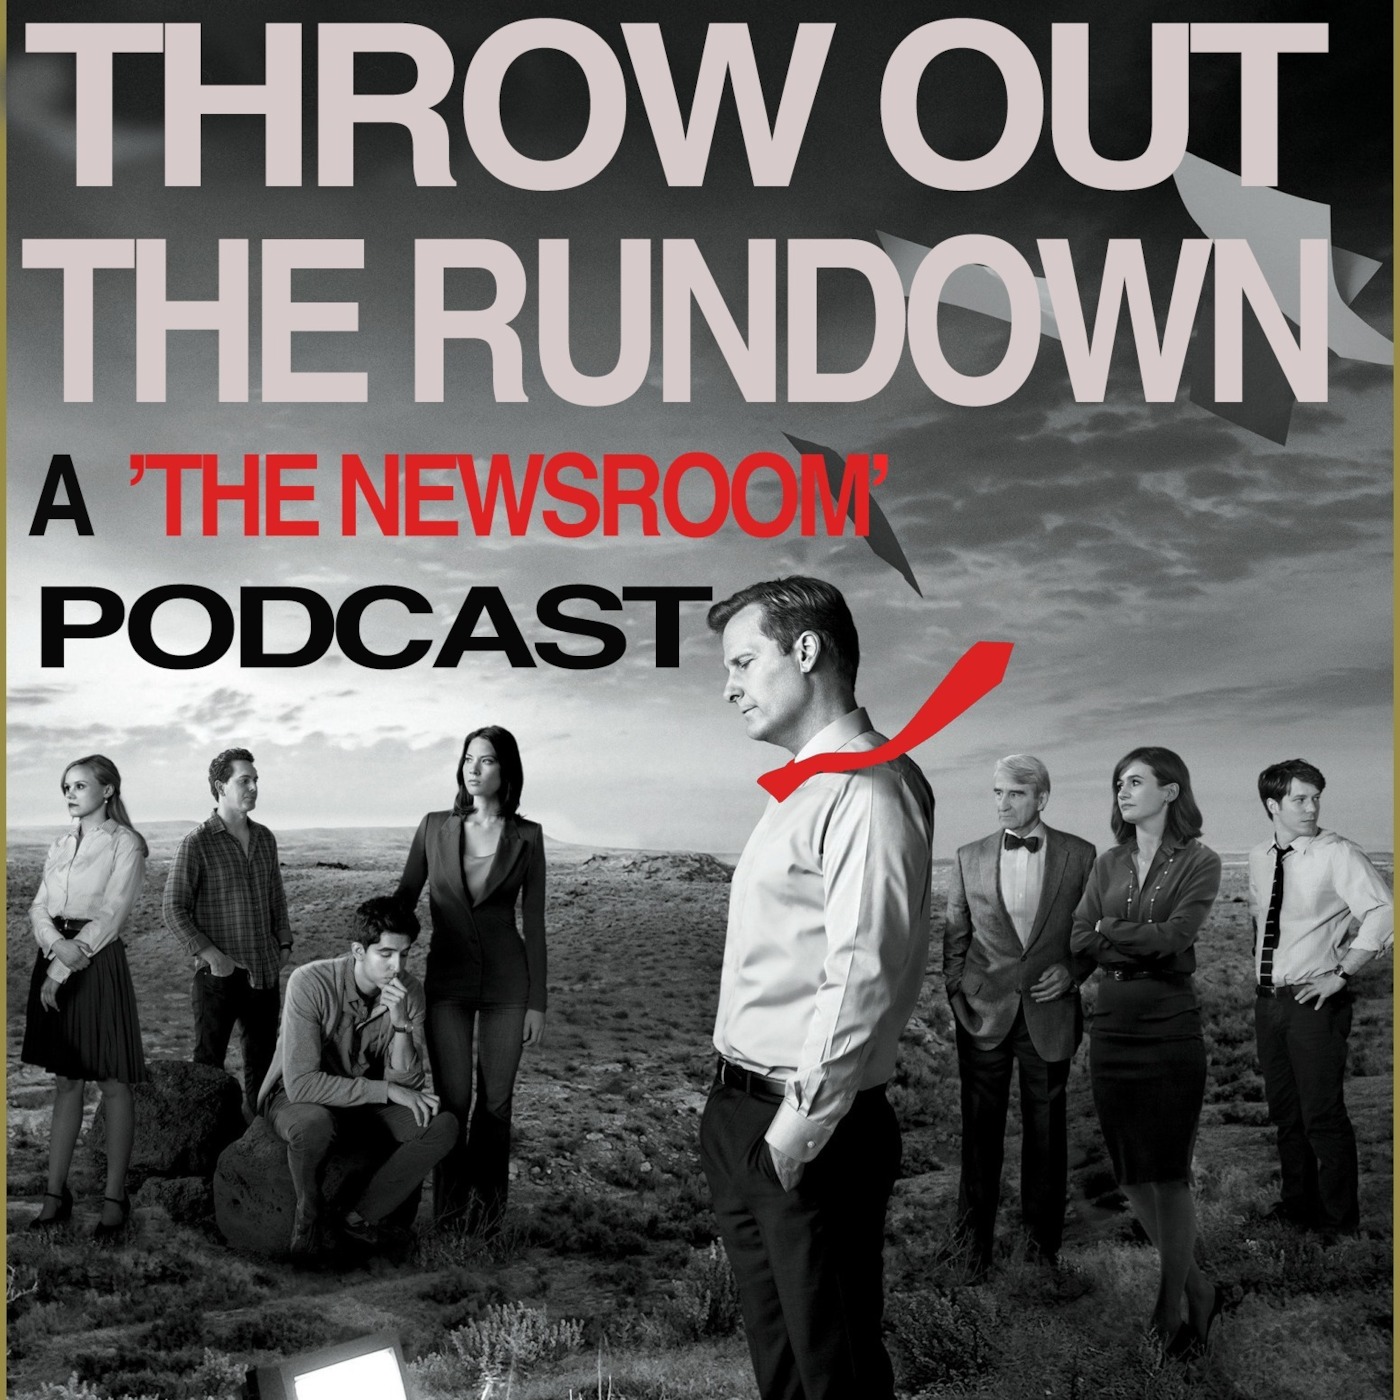 Throw Out the Rundown: 'The Newsroom' Podcast